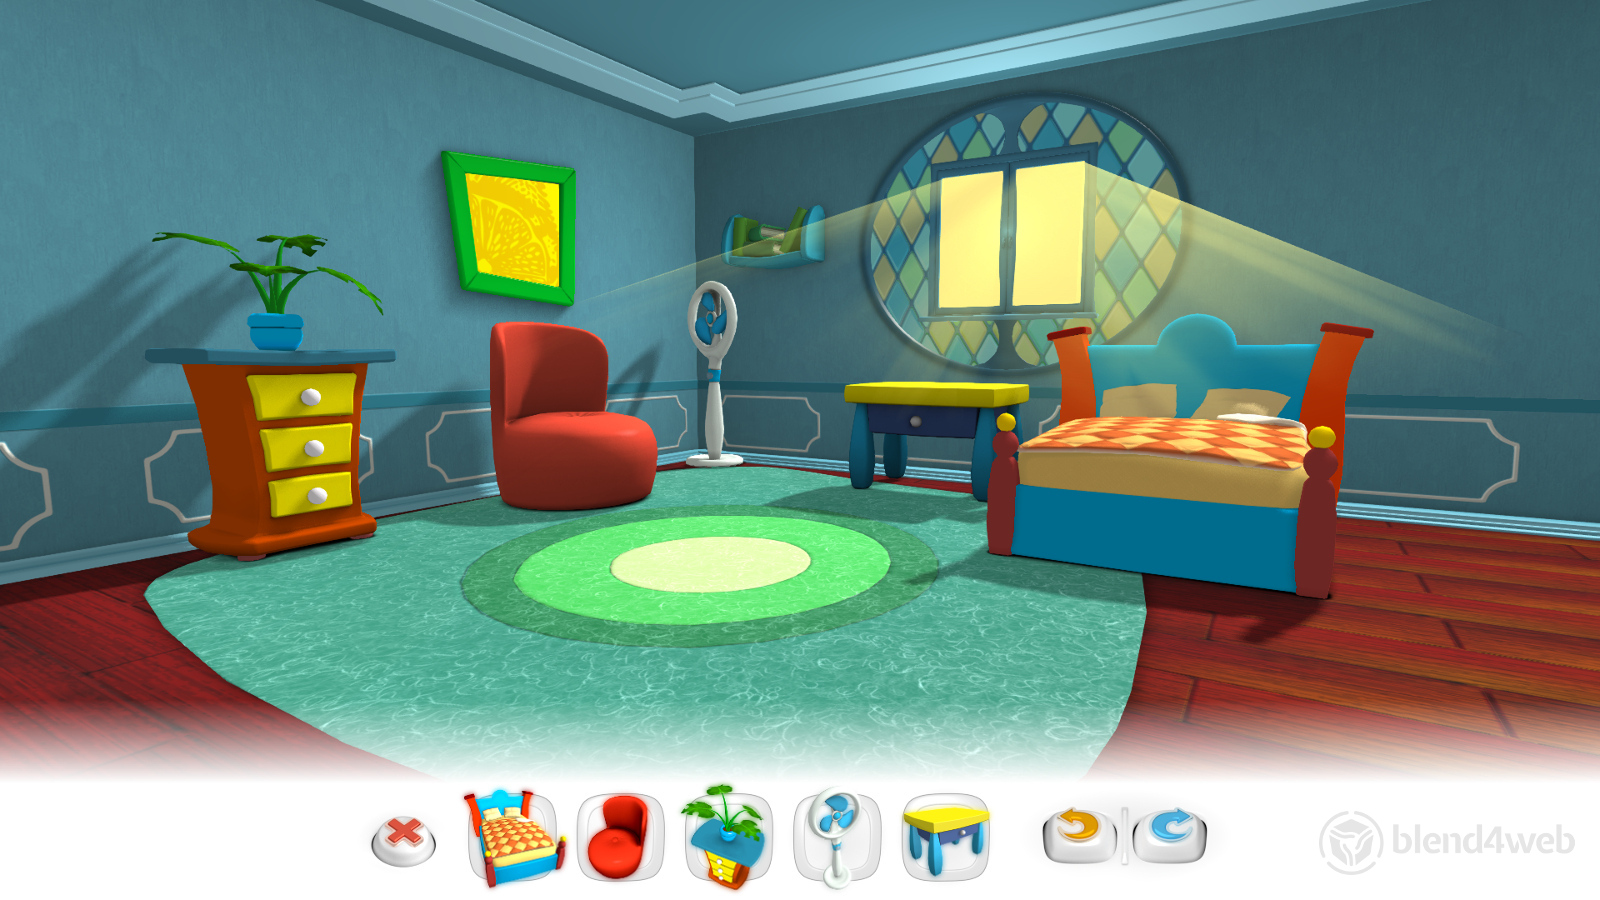 Furnishing a Room preview 